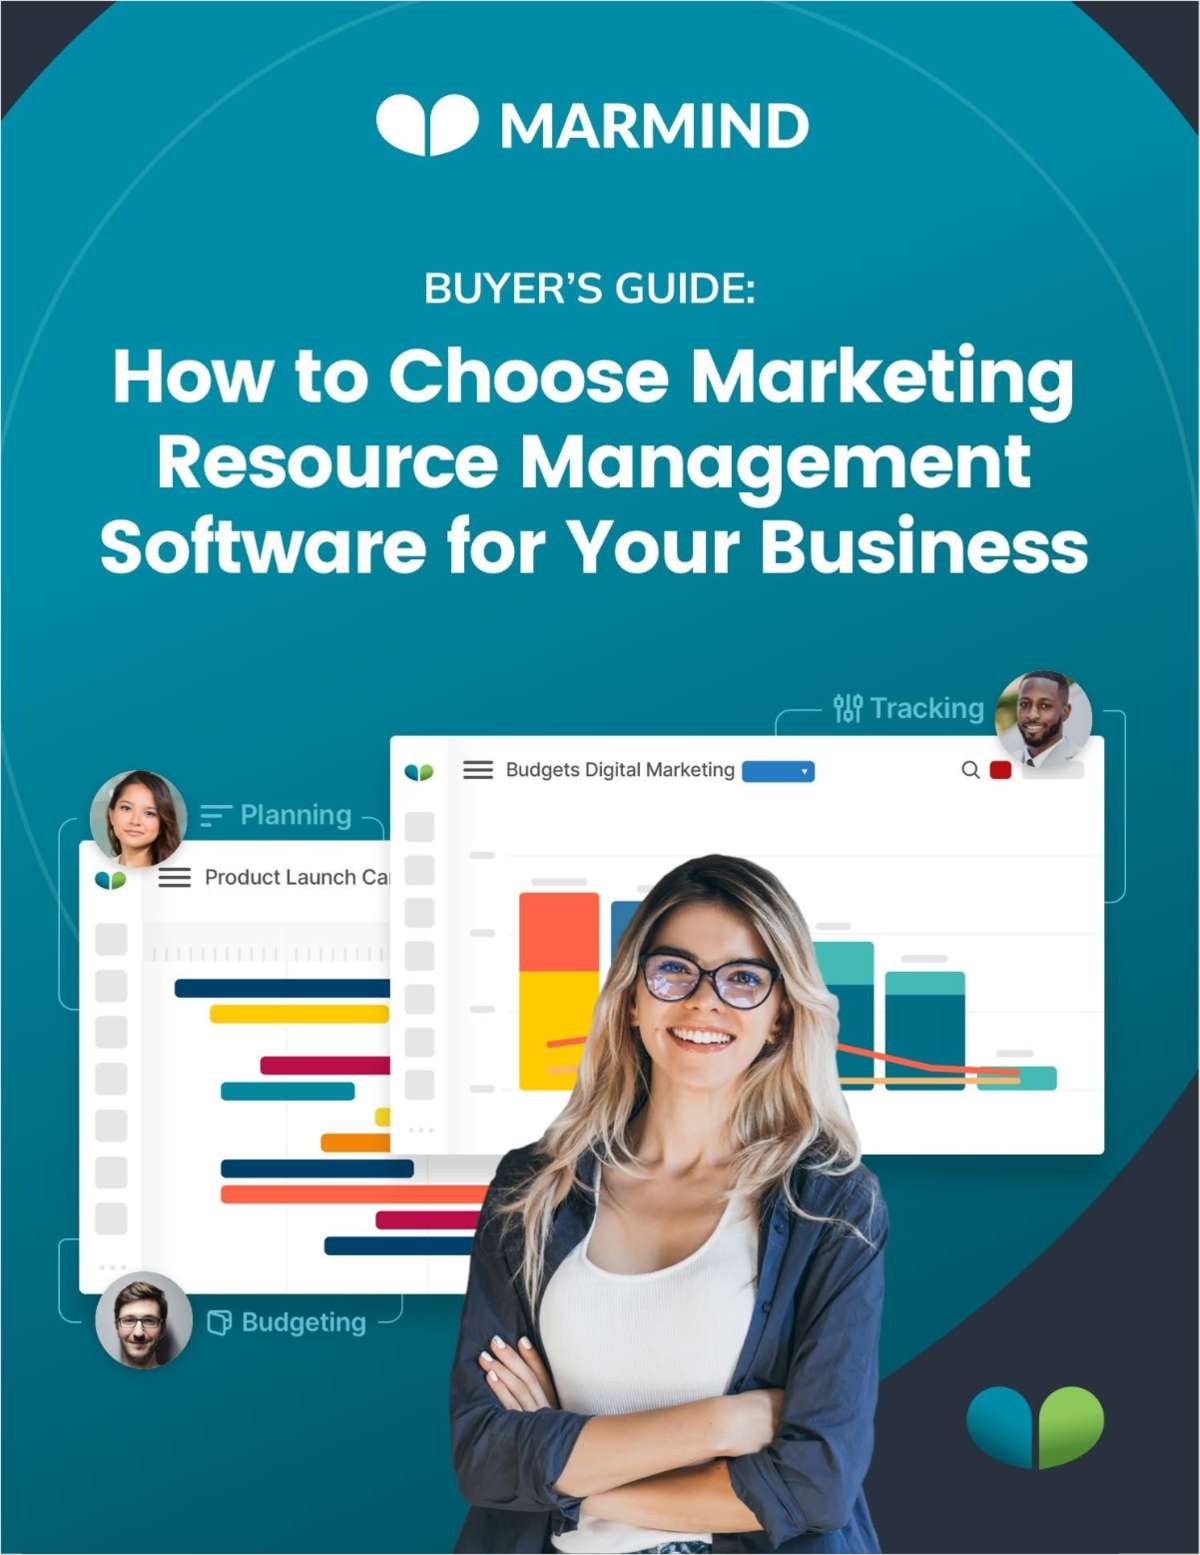 w masi107c8 - Buyer's Guide: How to Choose Marketing Resource Management (MRM) Software for Your Business